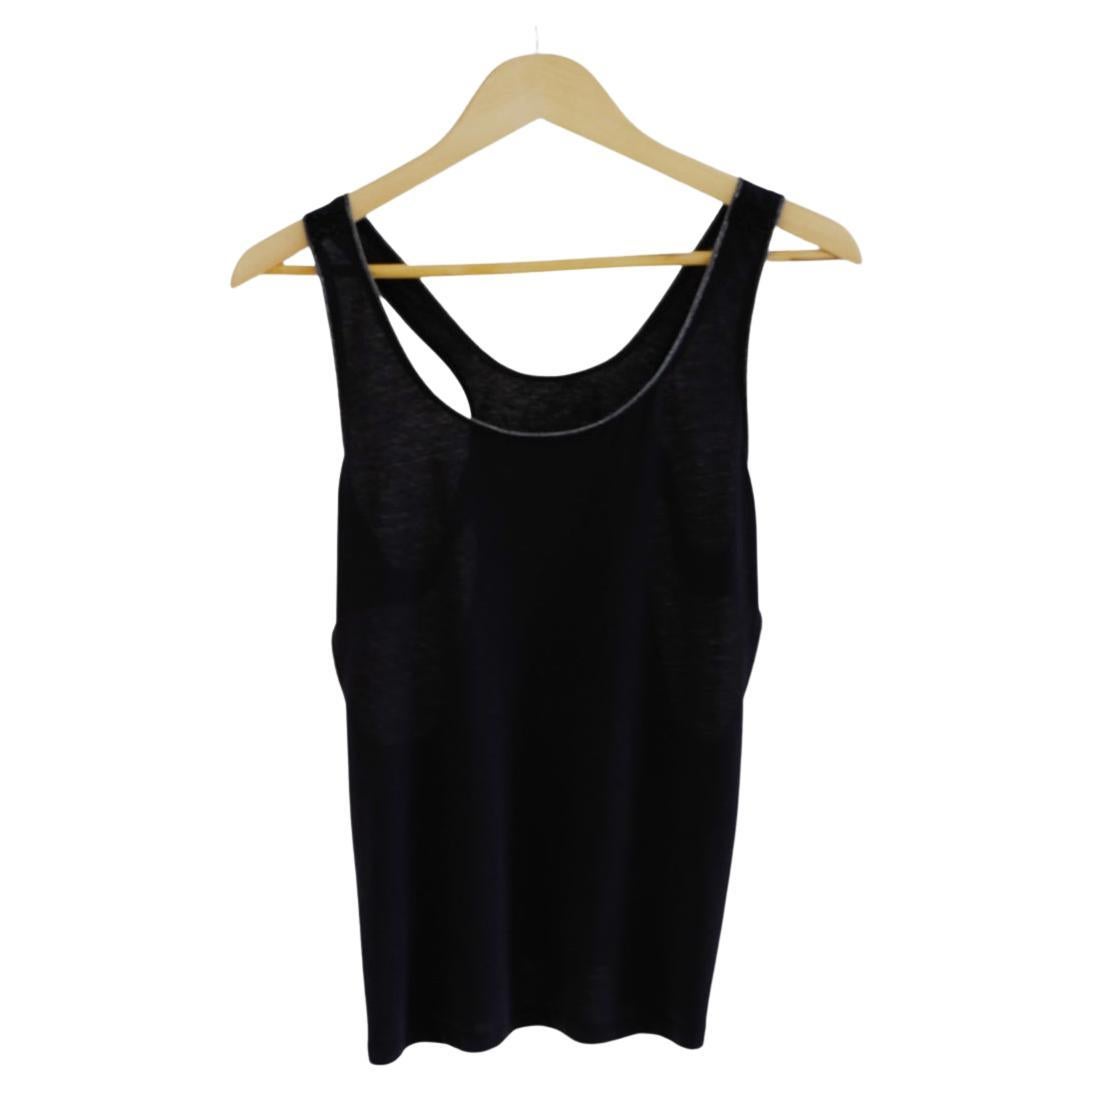 Tank Top Sleeveless Cut Out Cotton Black Silver Trims 
First page is showing can of tank top
Designer: J Dauphin
One of a kind

Size: Small

Available for immediate delivery
